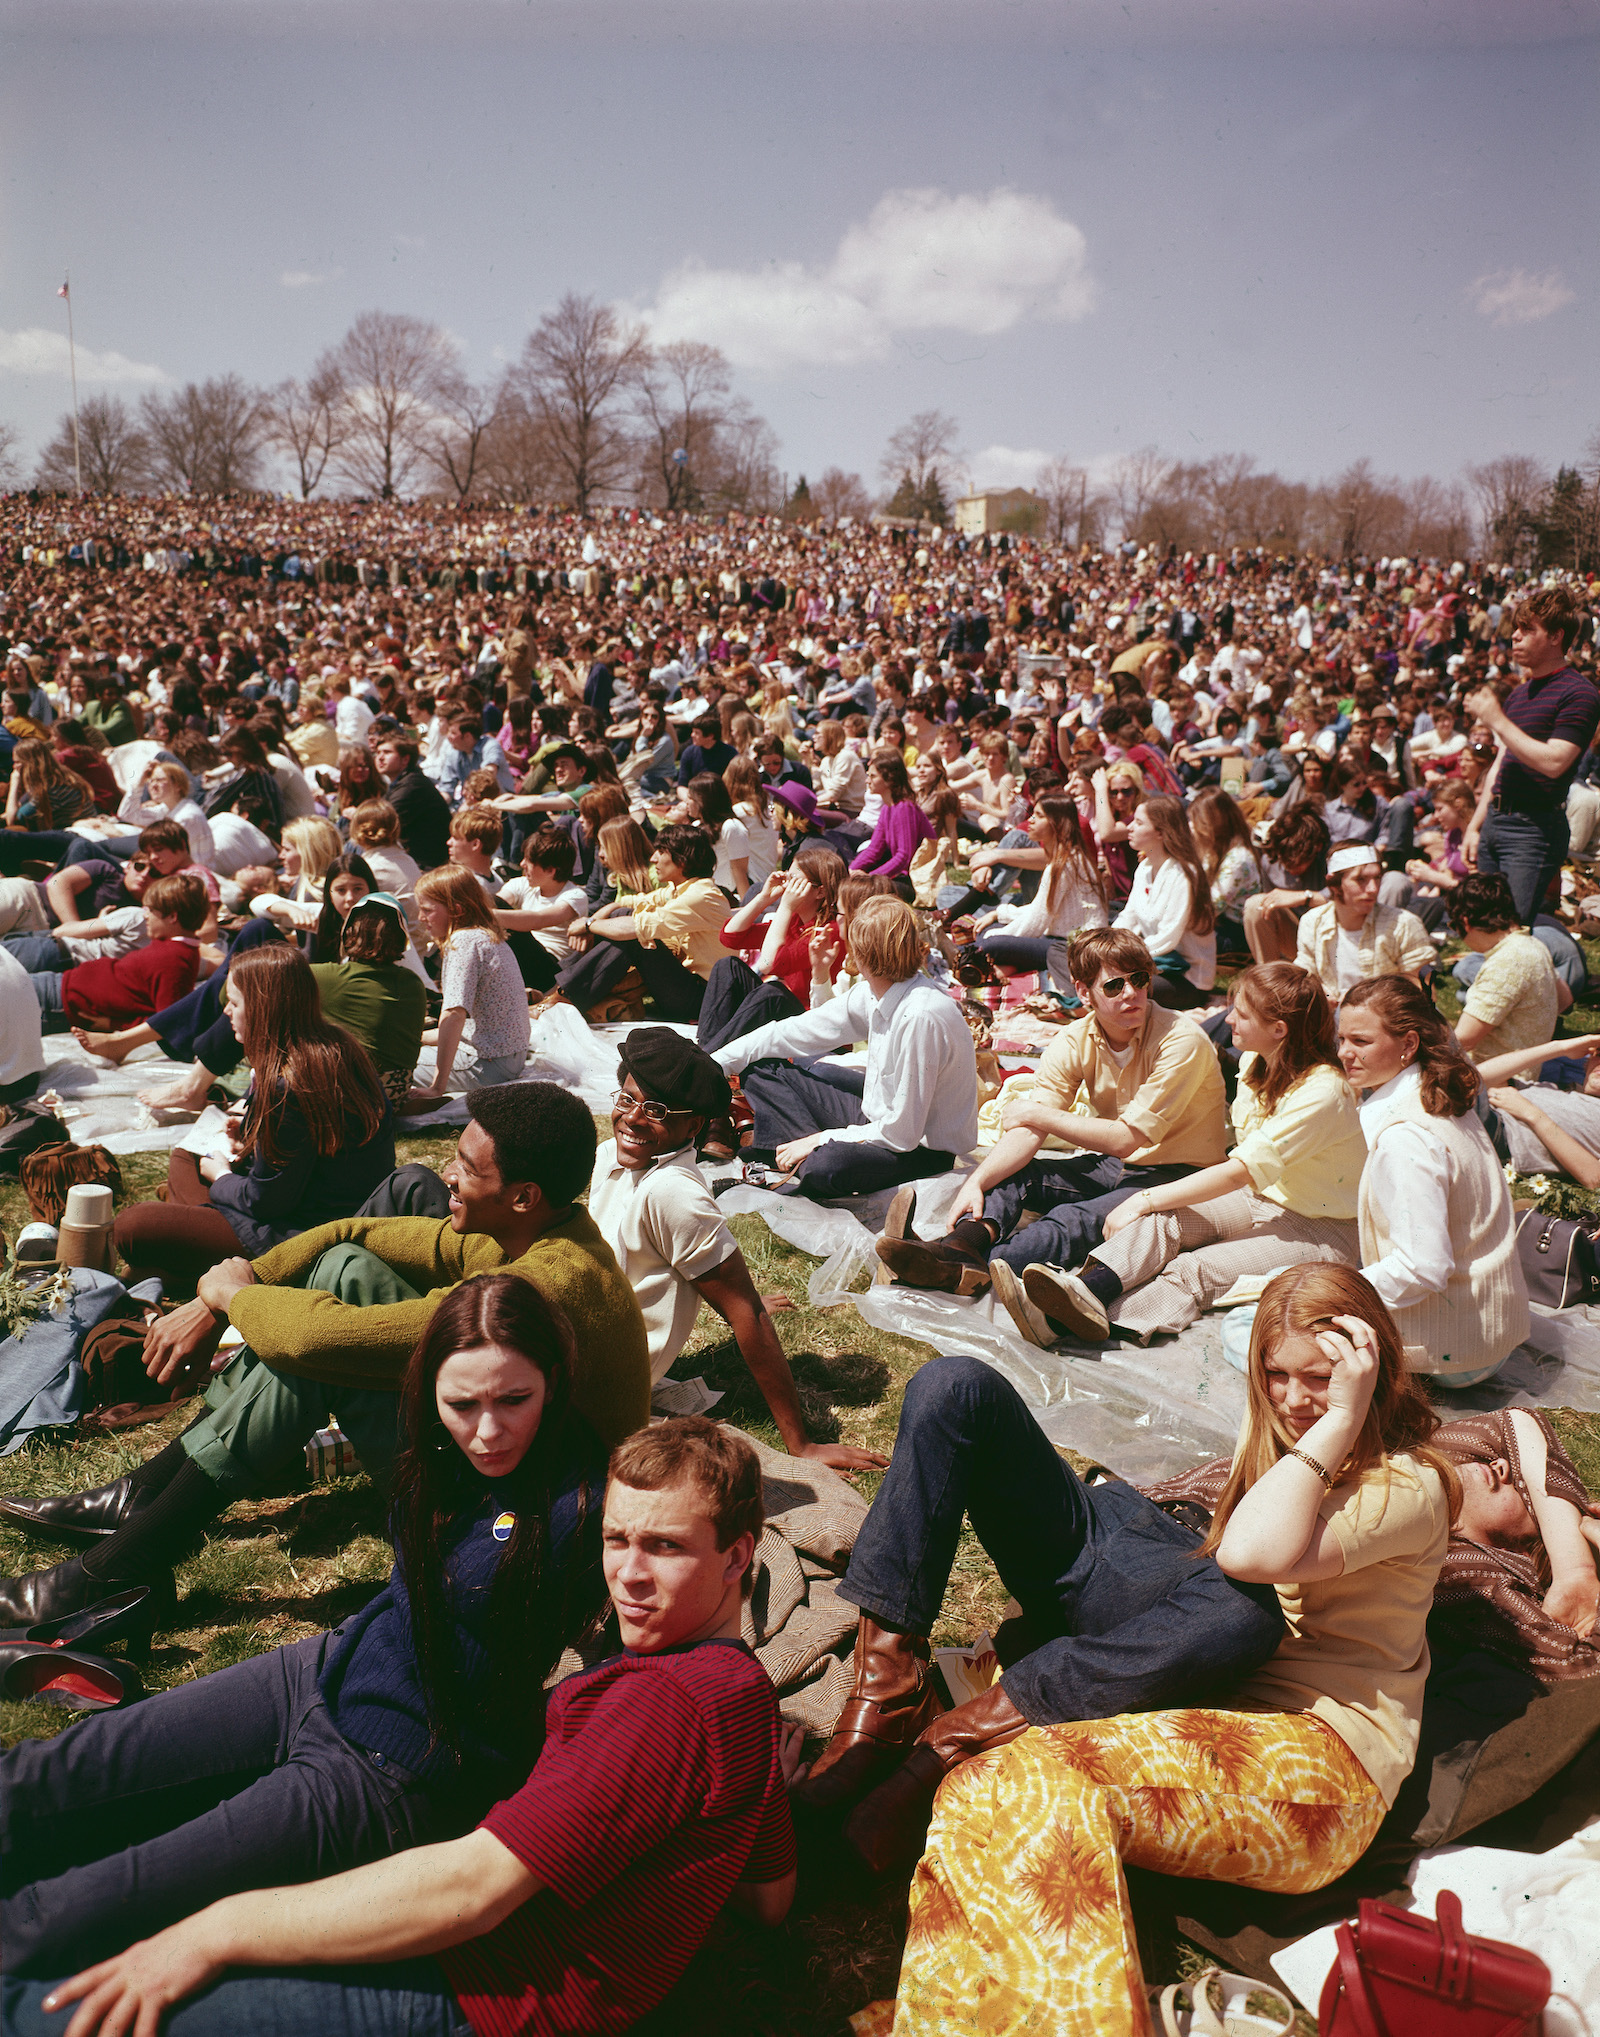 A historic photo of many people sitting on a large lawn